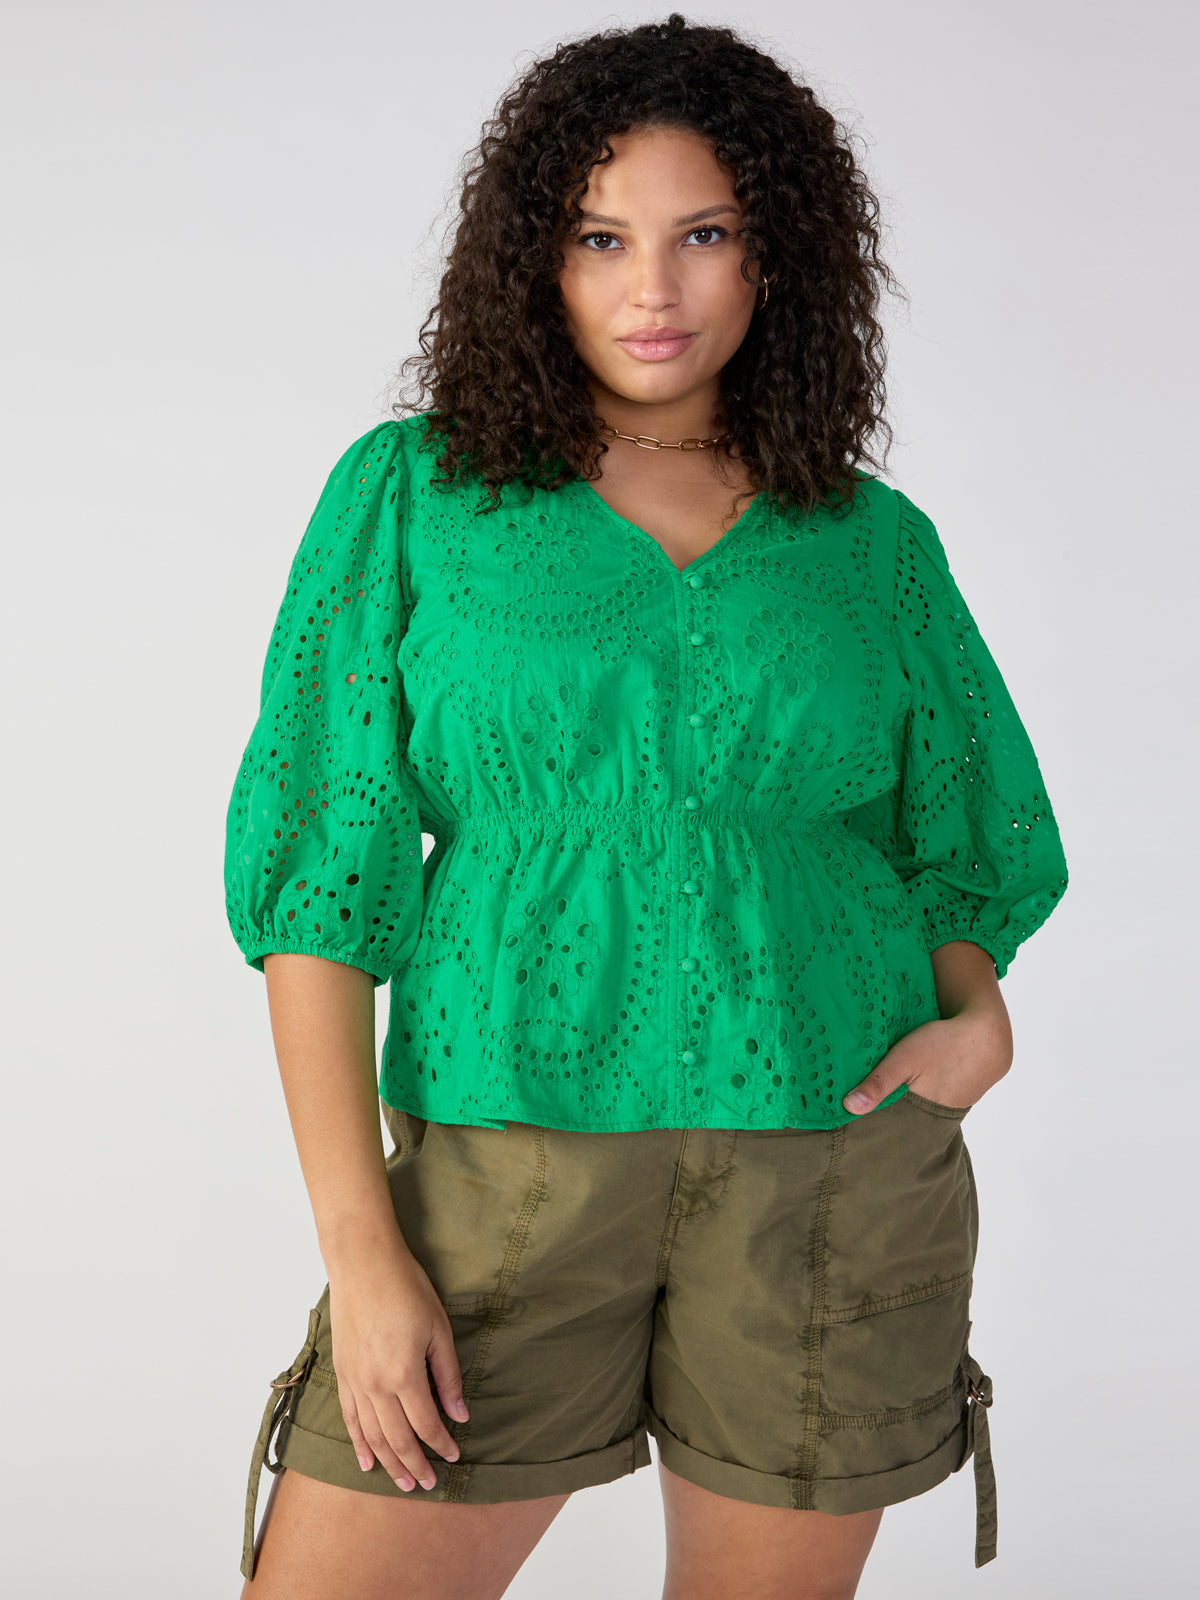 Eyelet Button Front Top Jelly Bean Inclusive Collection